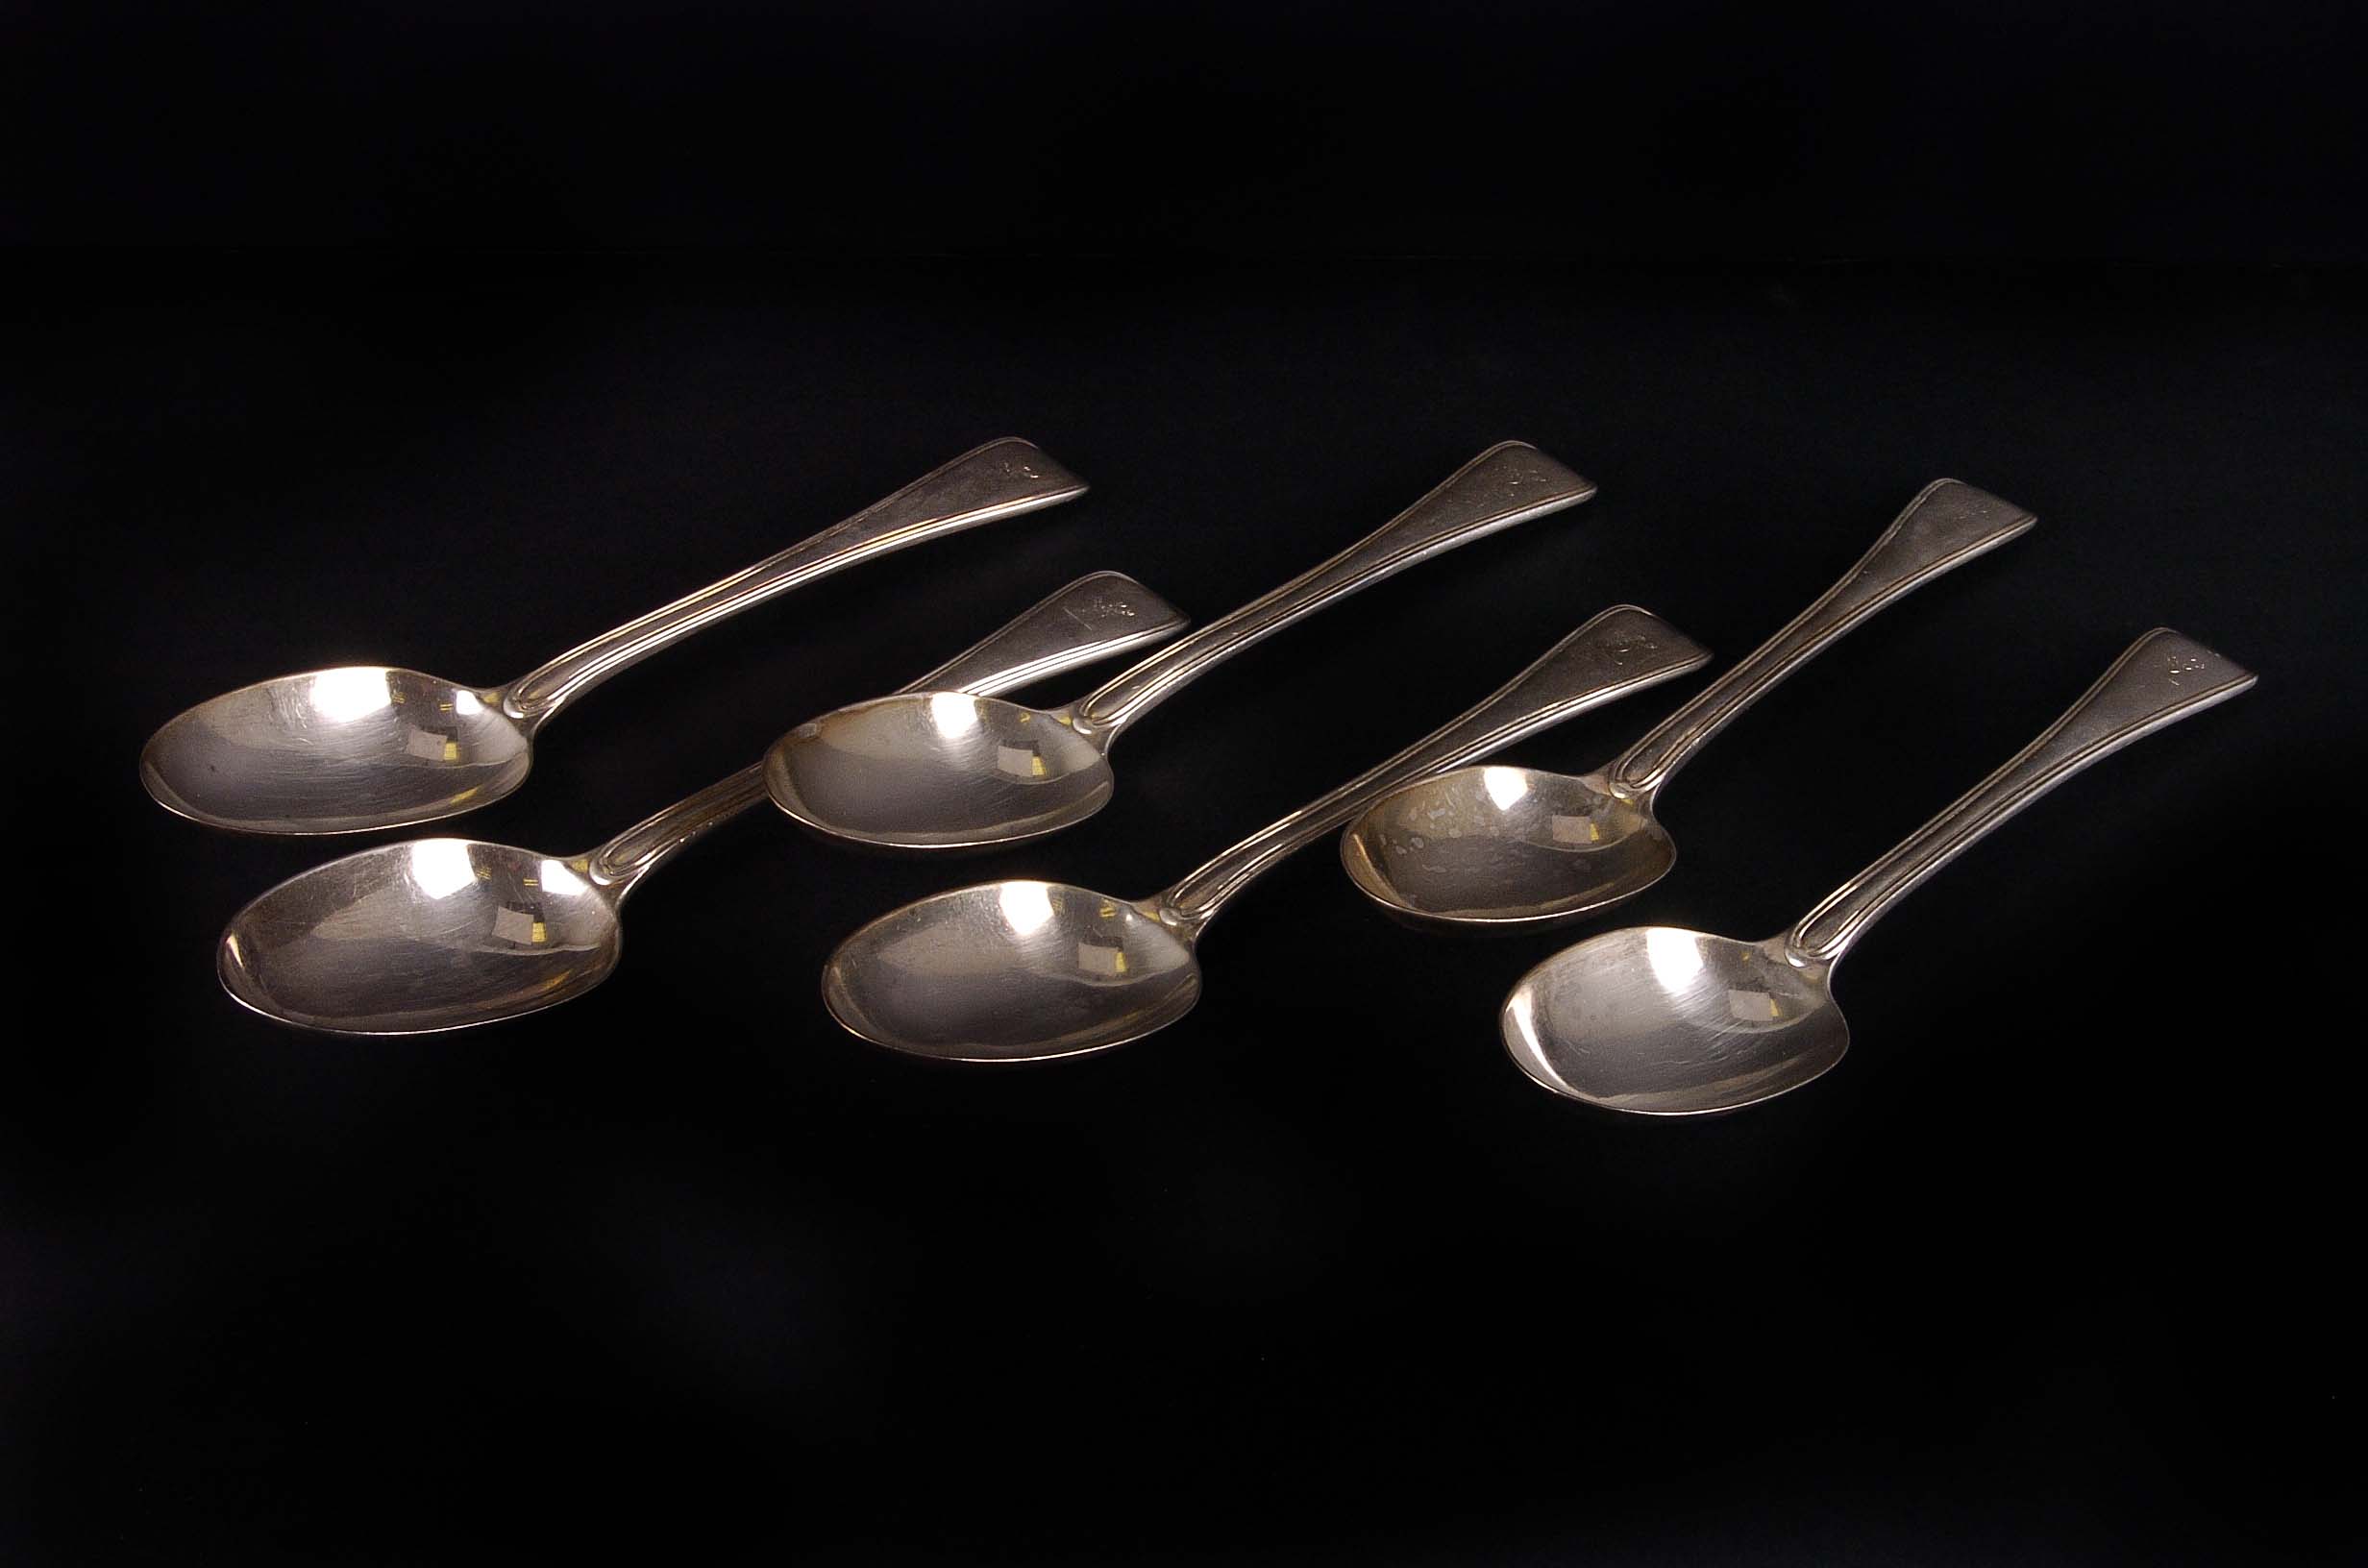 A set of six Edward VII silver tablespoons, London 1903 by P.G. Dodd & Son, with a deer head and